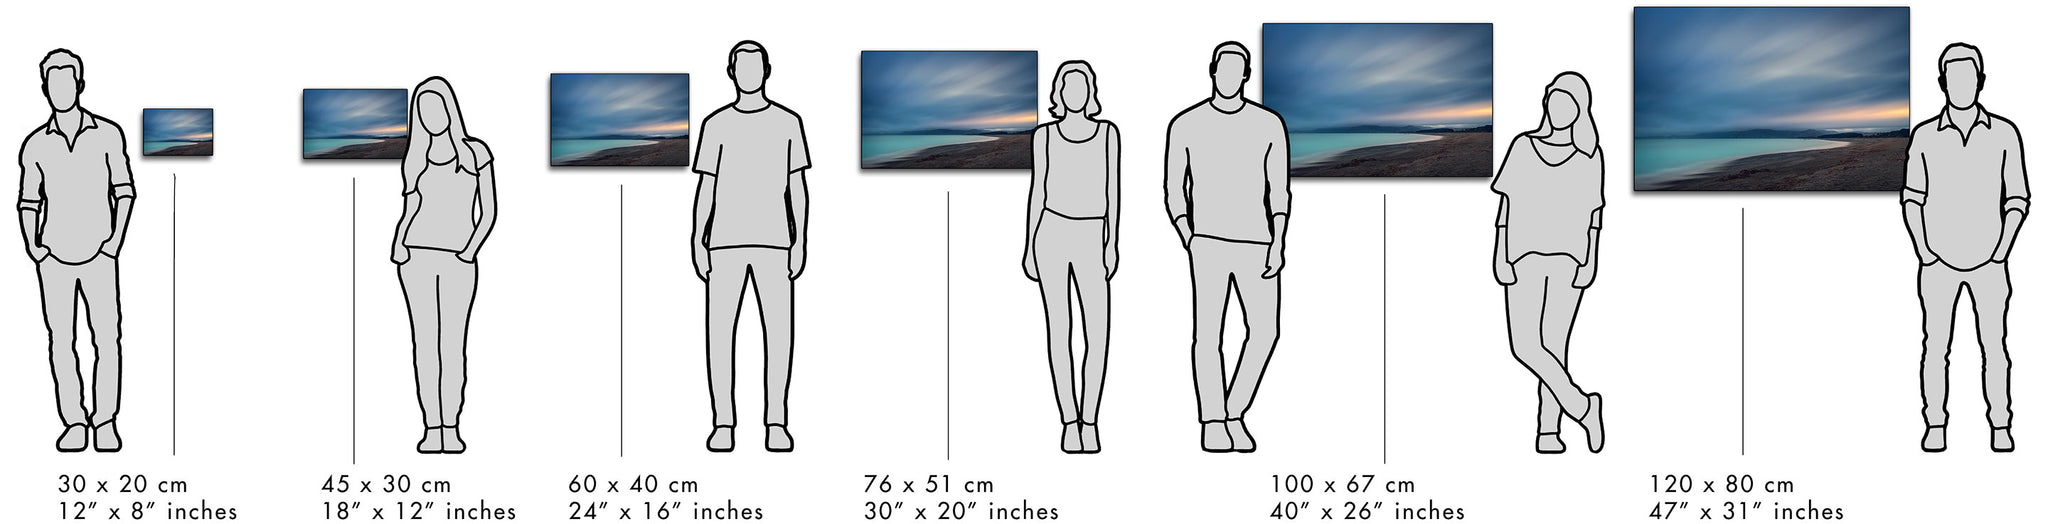 Visual guide to show the size of the photo prints against the height of people